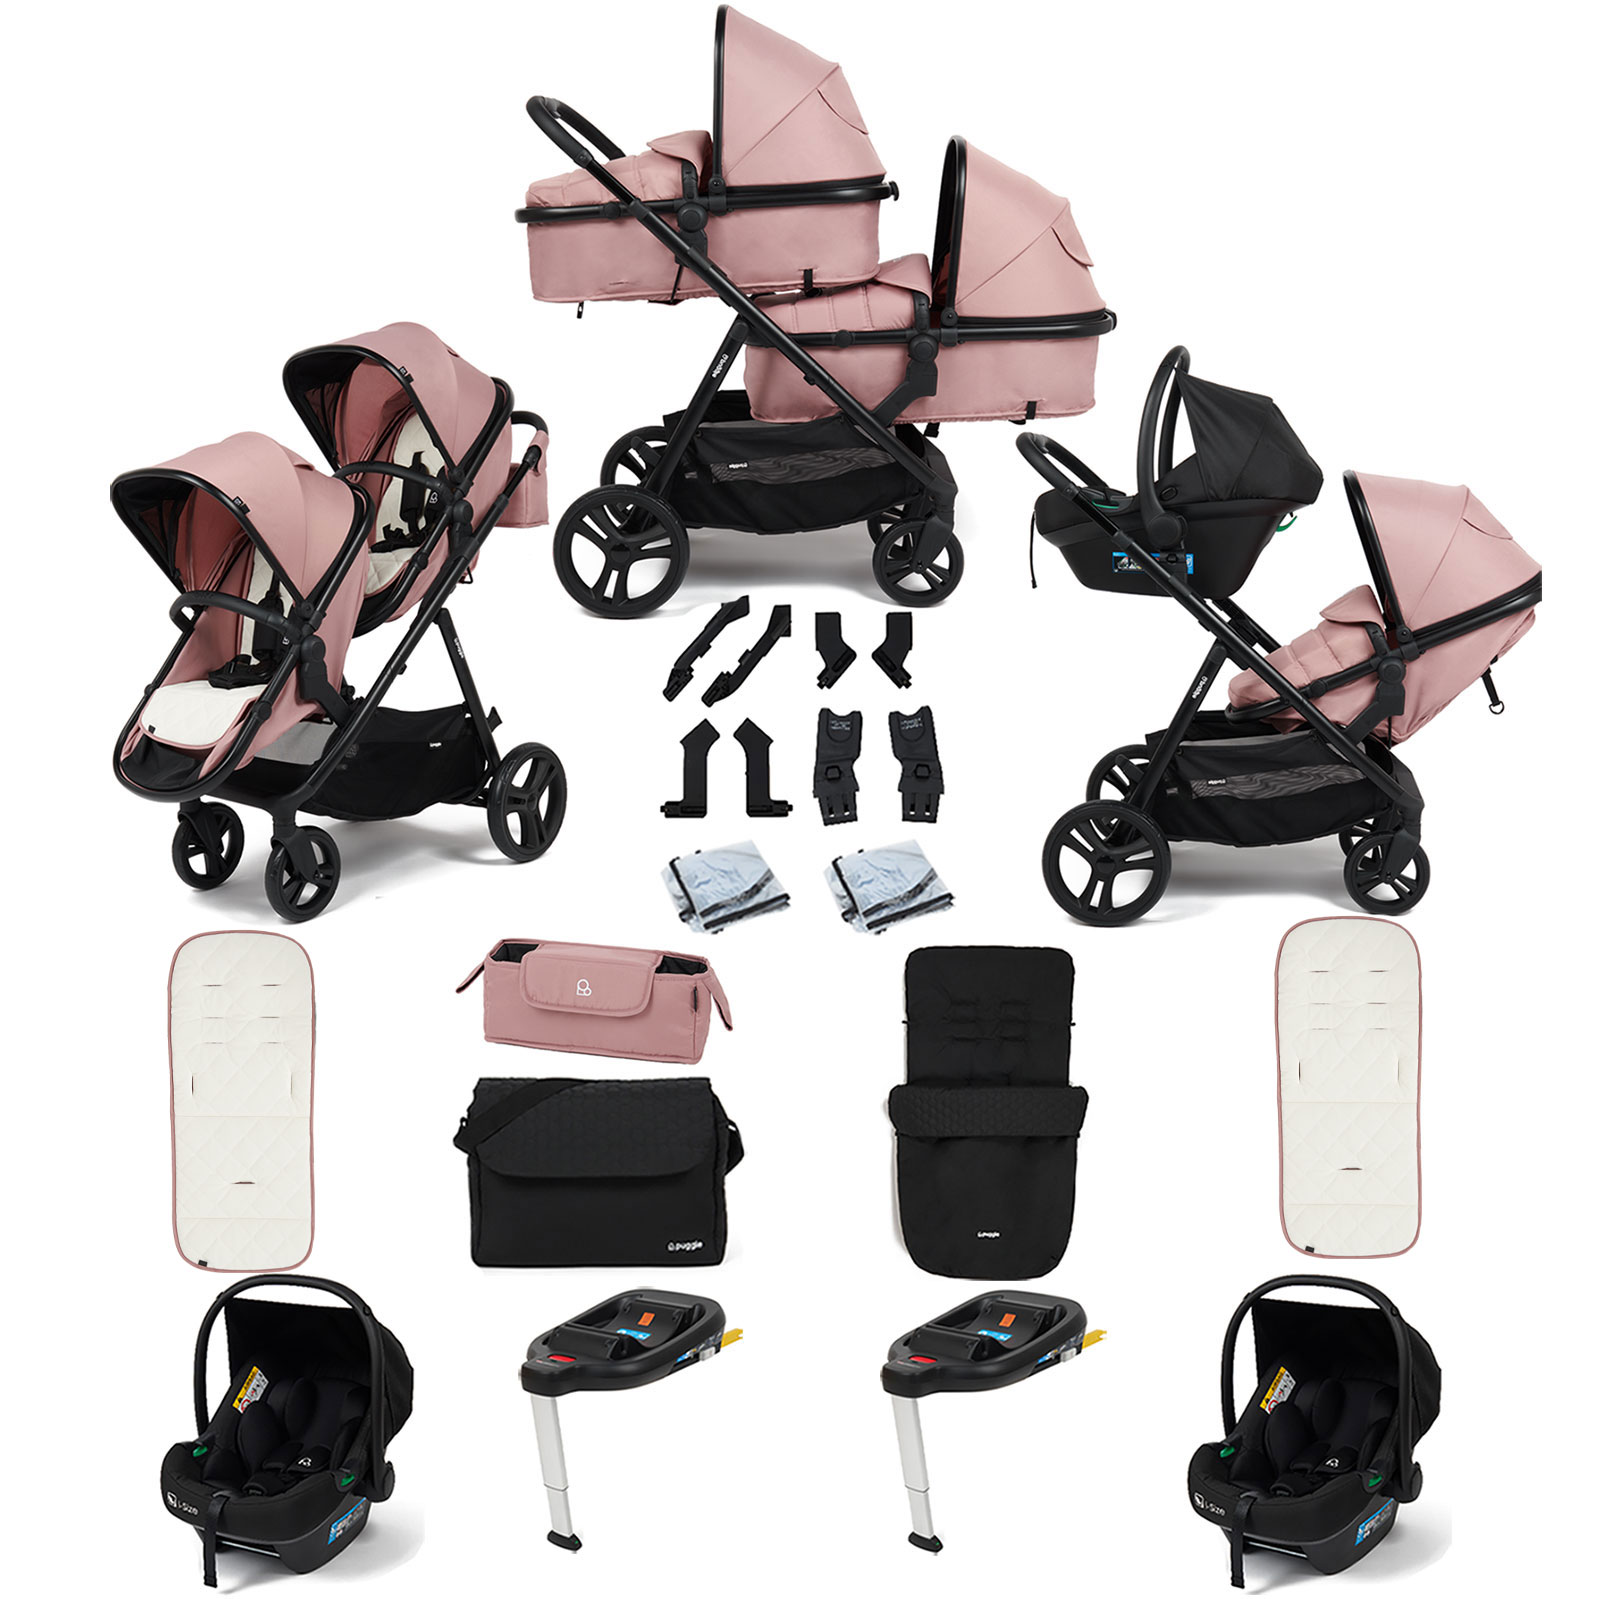 Puggle Memphis 2-in-1 Duo Double Travel System with 2 i-Size Car Seats, 2 ISOFIX Bases, Footmuff and Changing Bag - Dusk Pink